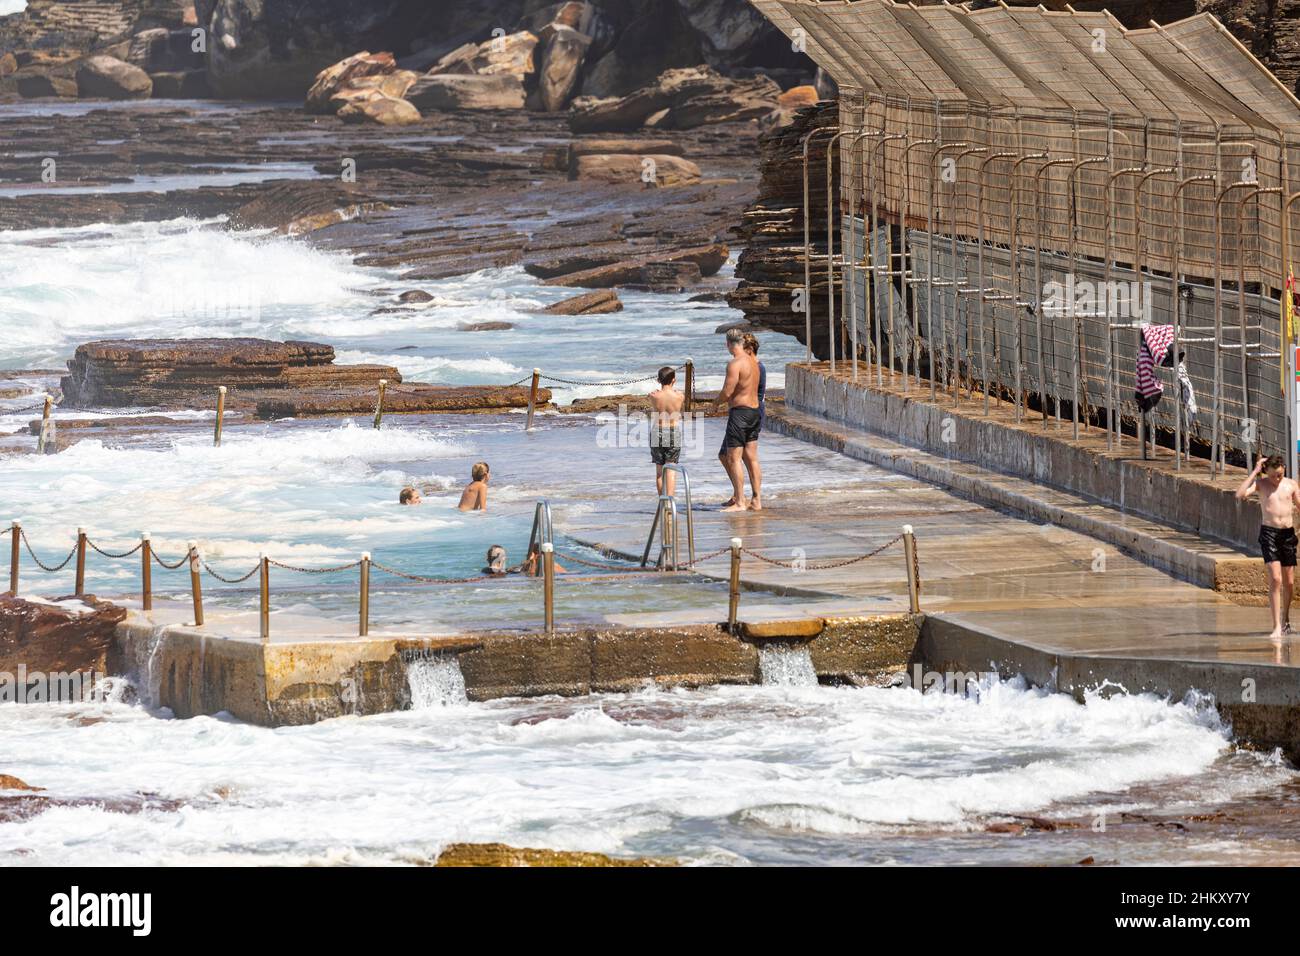 Avalon Beach rock pool swimming pool and teenage boys having fun in the water during summer,Sydney,NSW,Australia Stock Photo